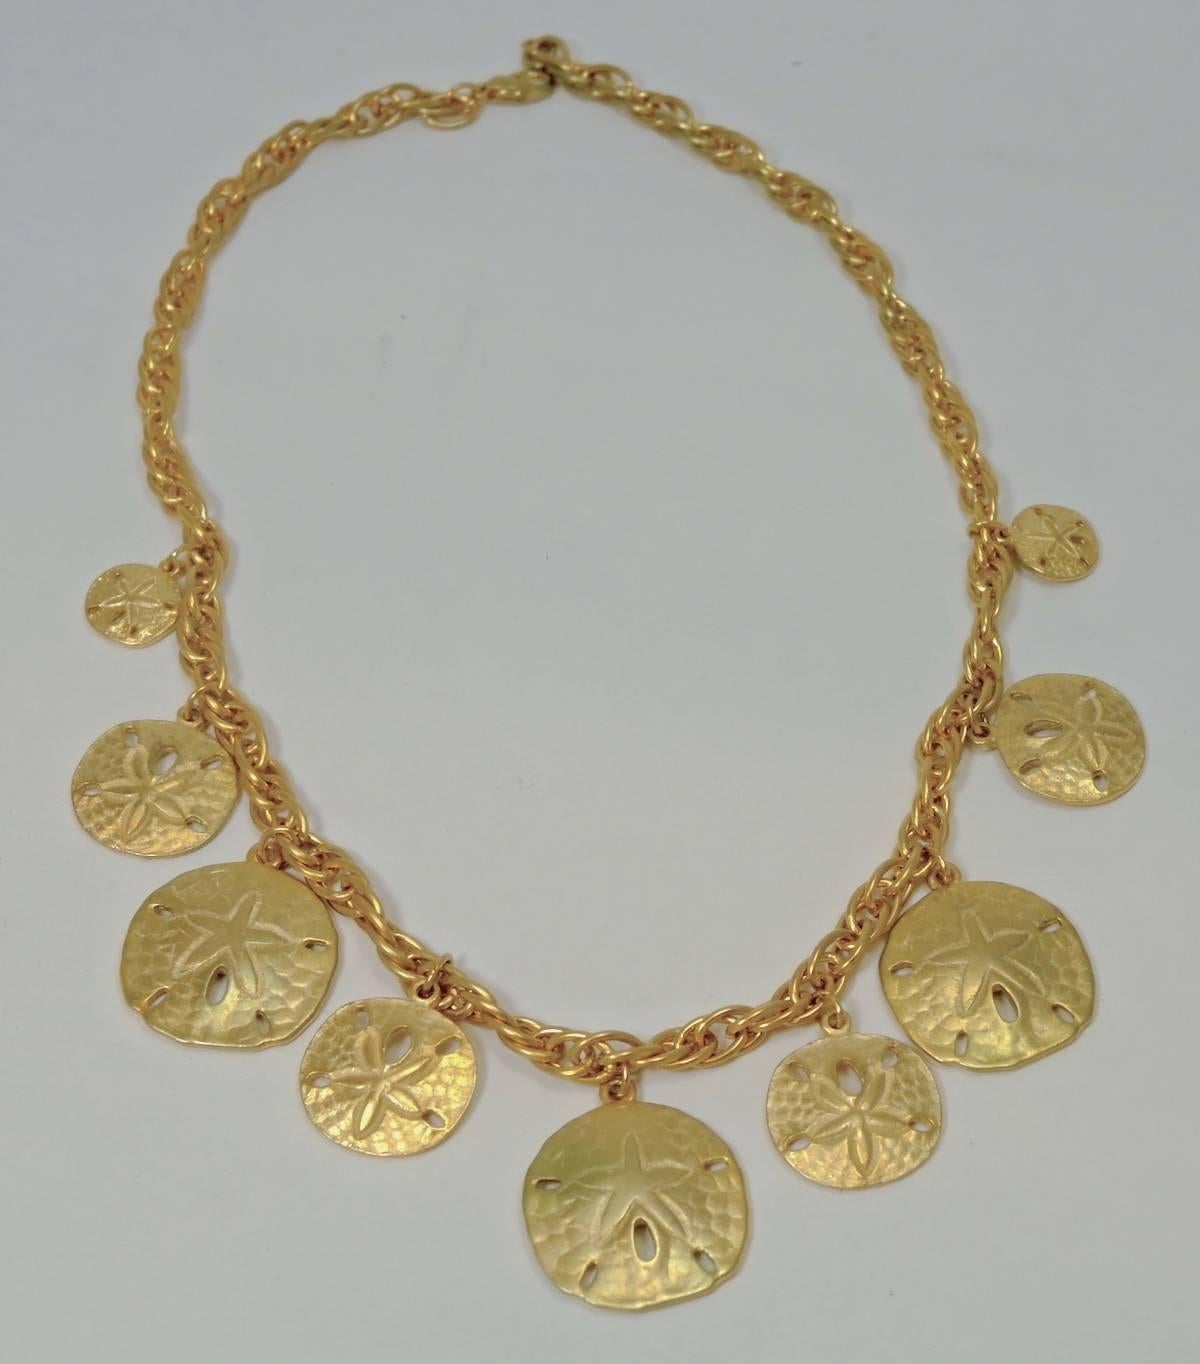 This pretty necklace features nine discs, all designed with a starfish in the center, dangling from a gold tone link chain. This necklace measures 18” x 1/4” and has a lobster clasp. It is in excellent condition.